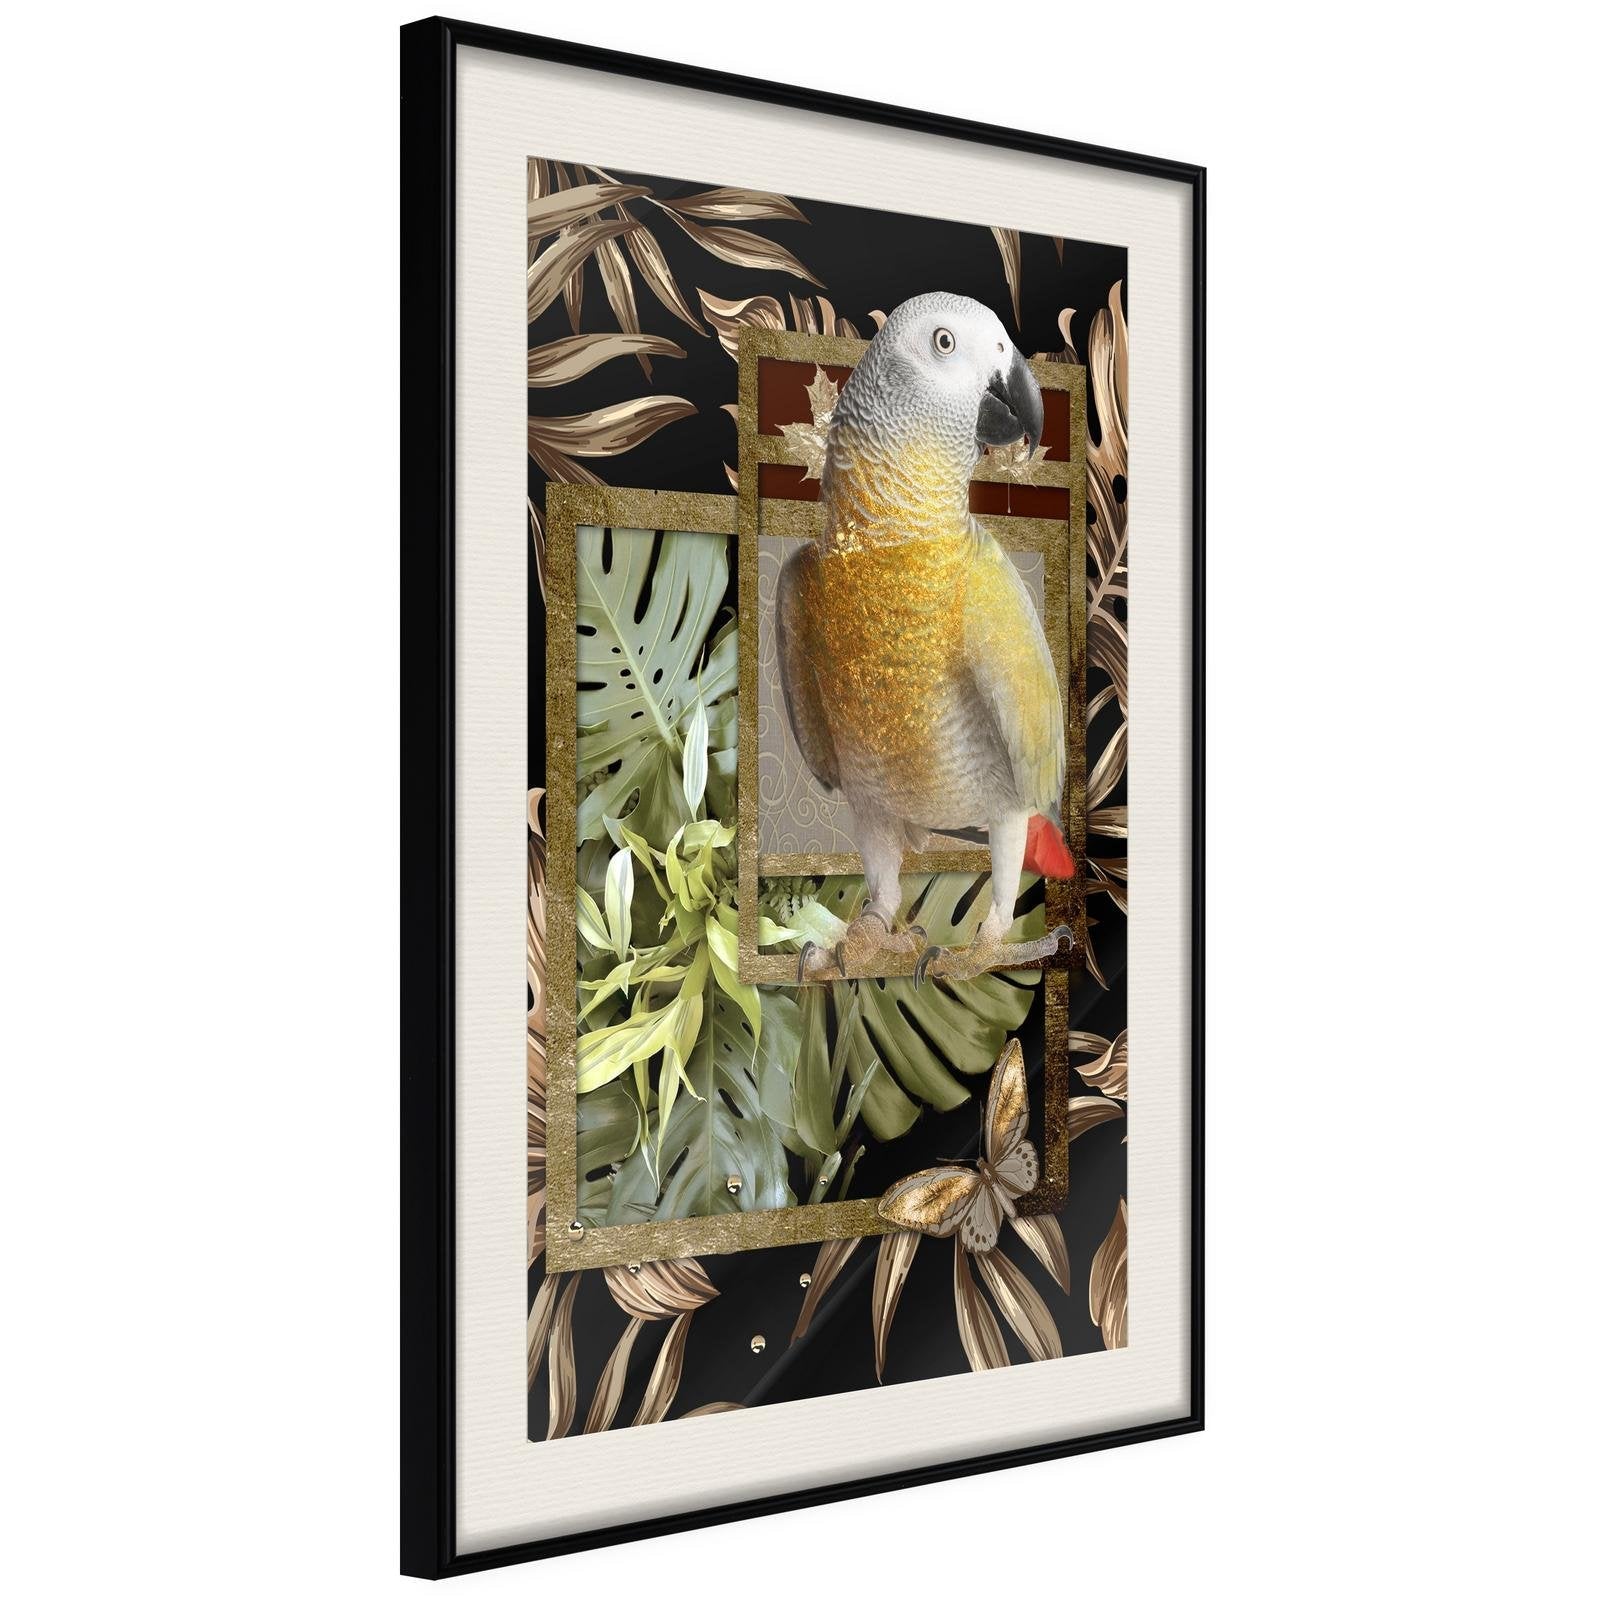 Inramad Poster / Tavla - Composition with Gold Parrot - 40x60 Svart ram med passepartout